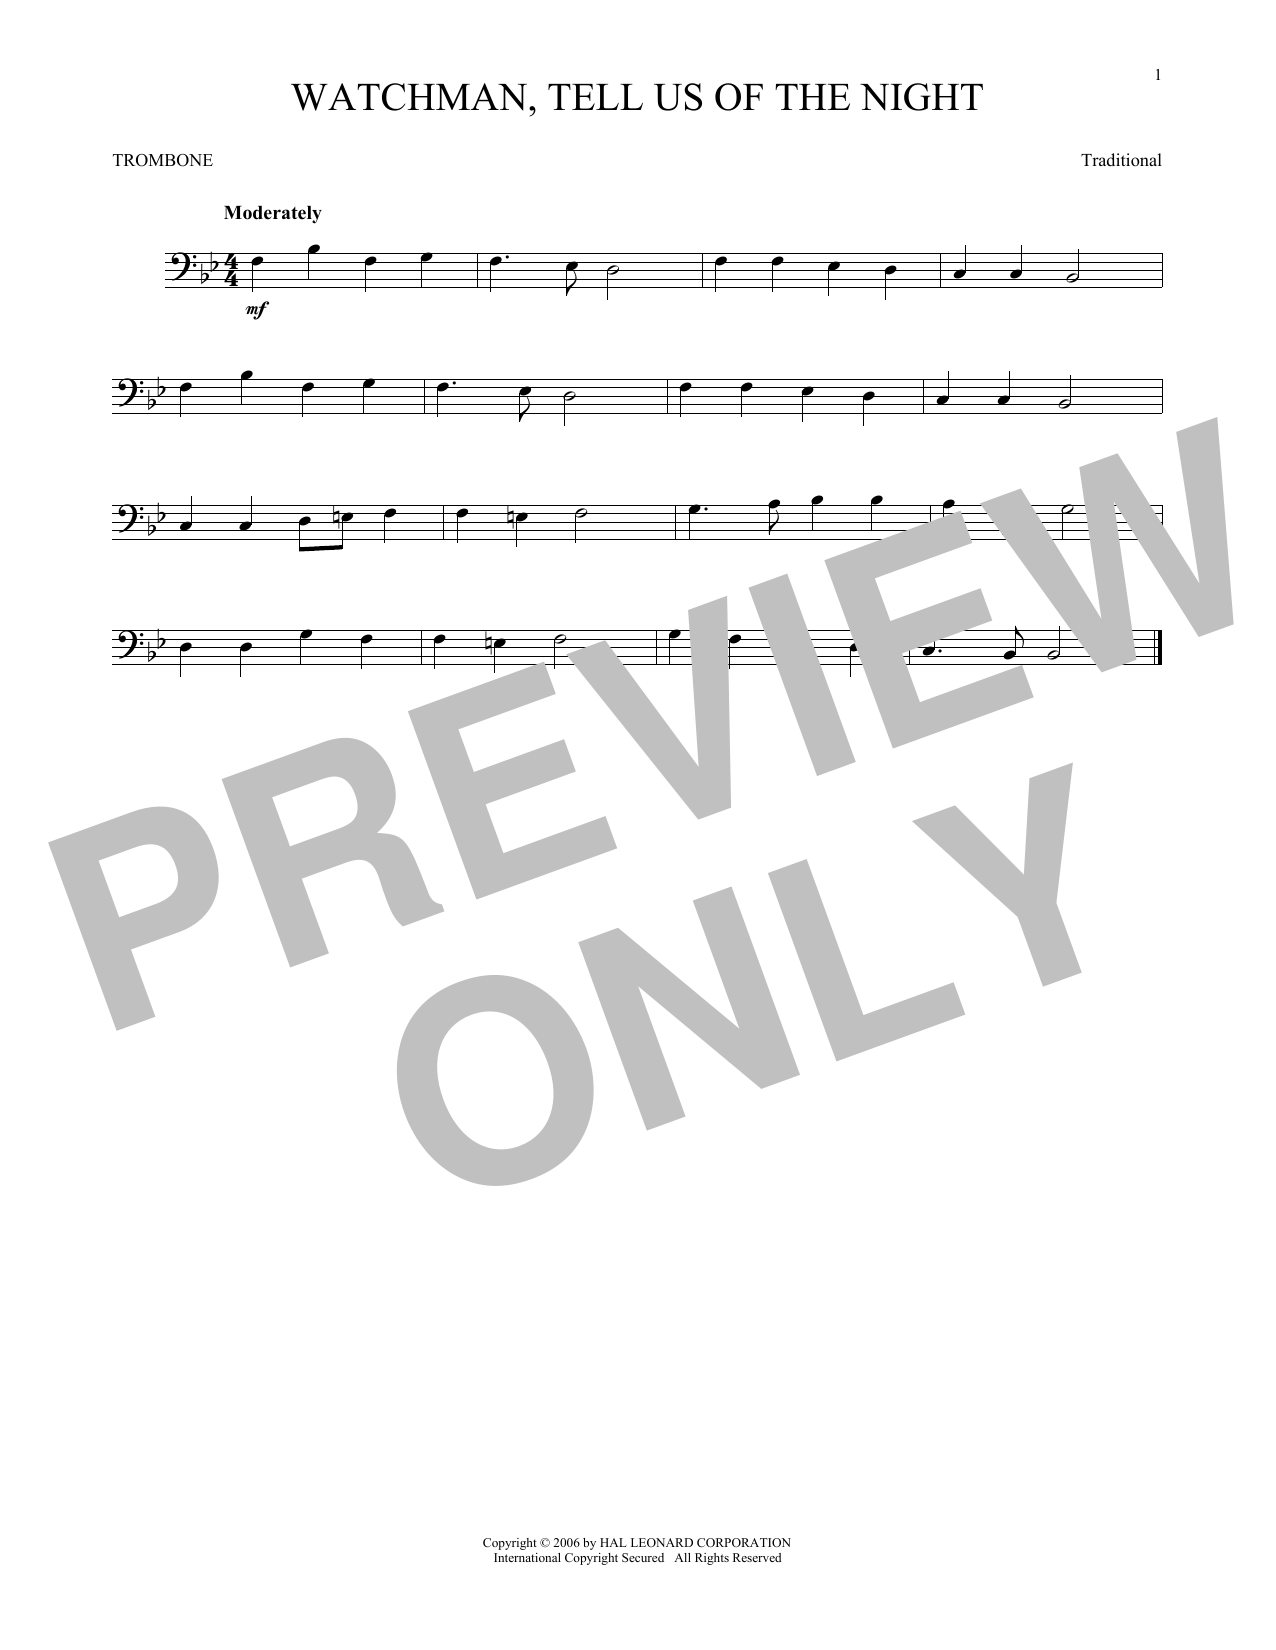 Download Traditional Watchman, Tell Us Of The Night Sheet Music